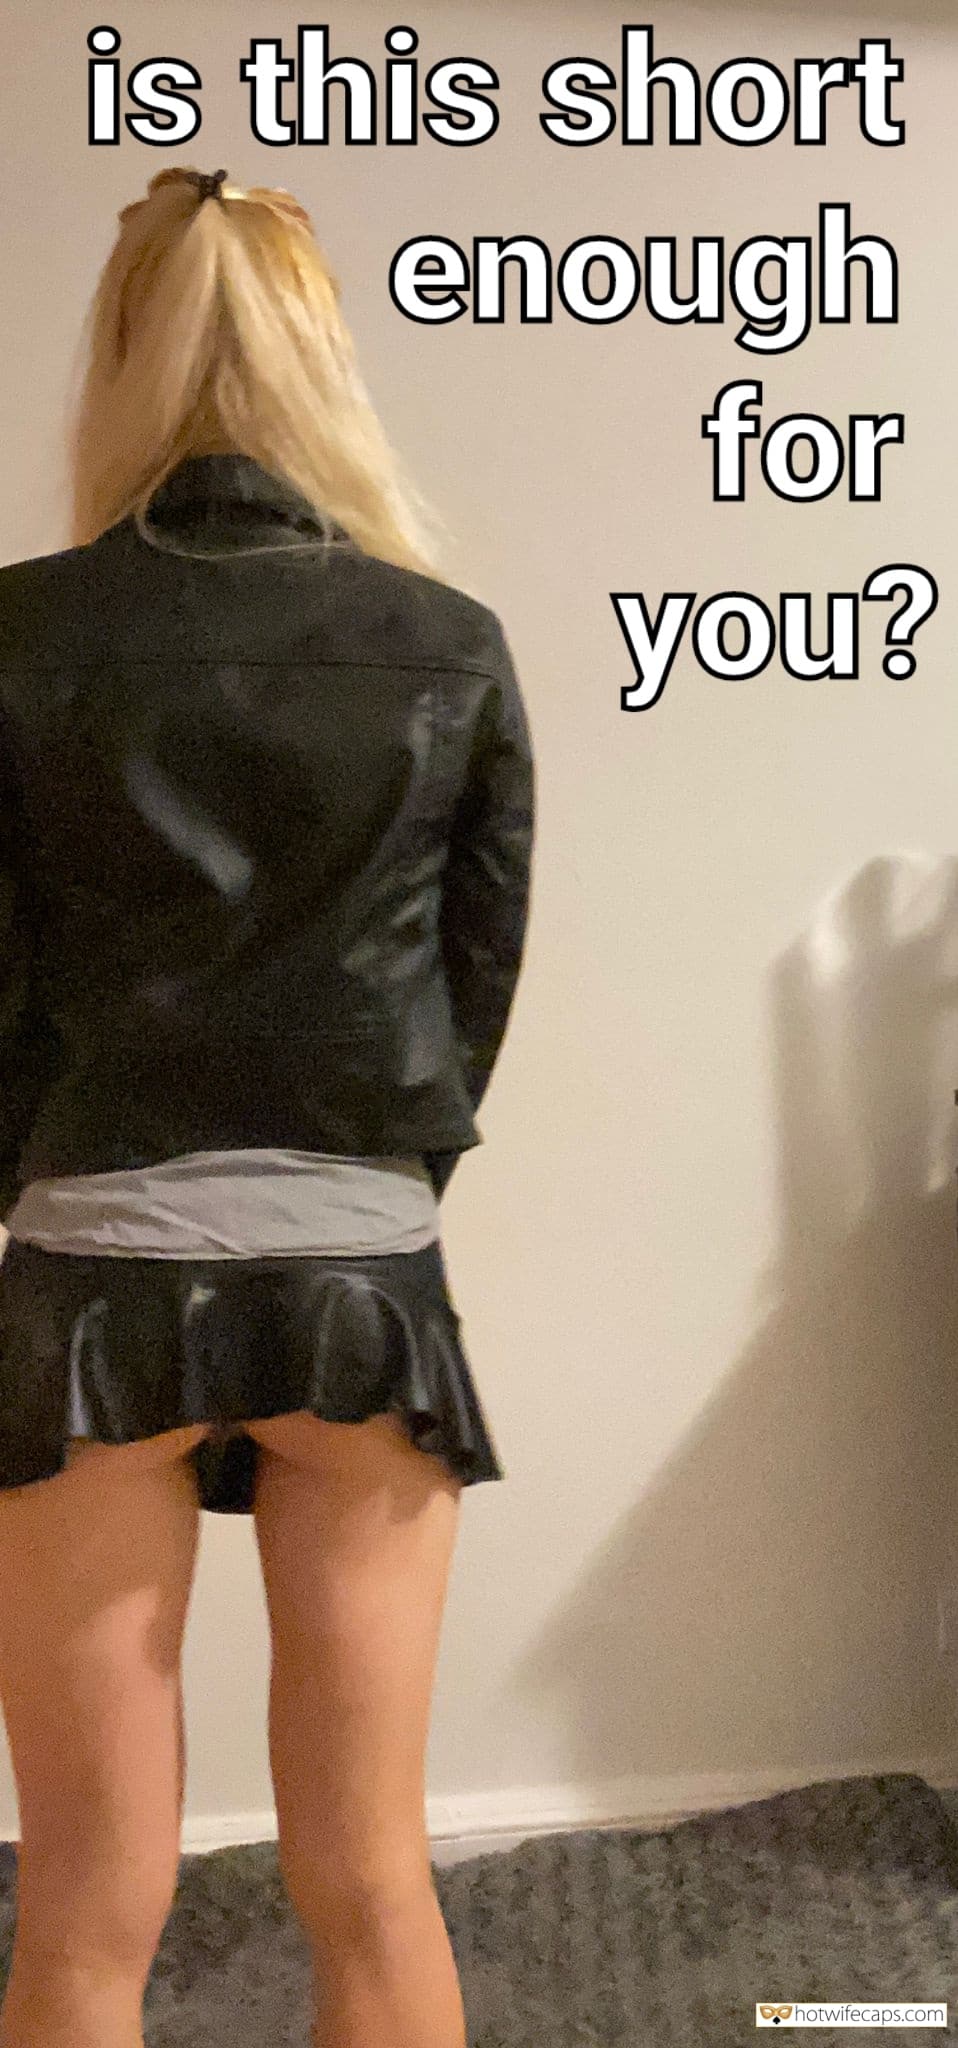 No Panties Getting Ready Dirty Talk Challenges and Rules hotwife caption: is this short enough for you? Petite Blonde in Latex Mini Skirt – No Panties for Easy Access